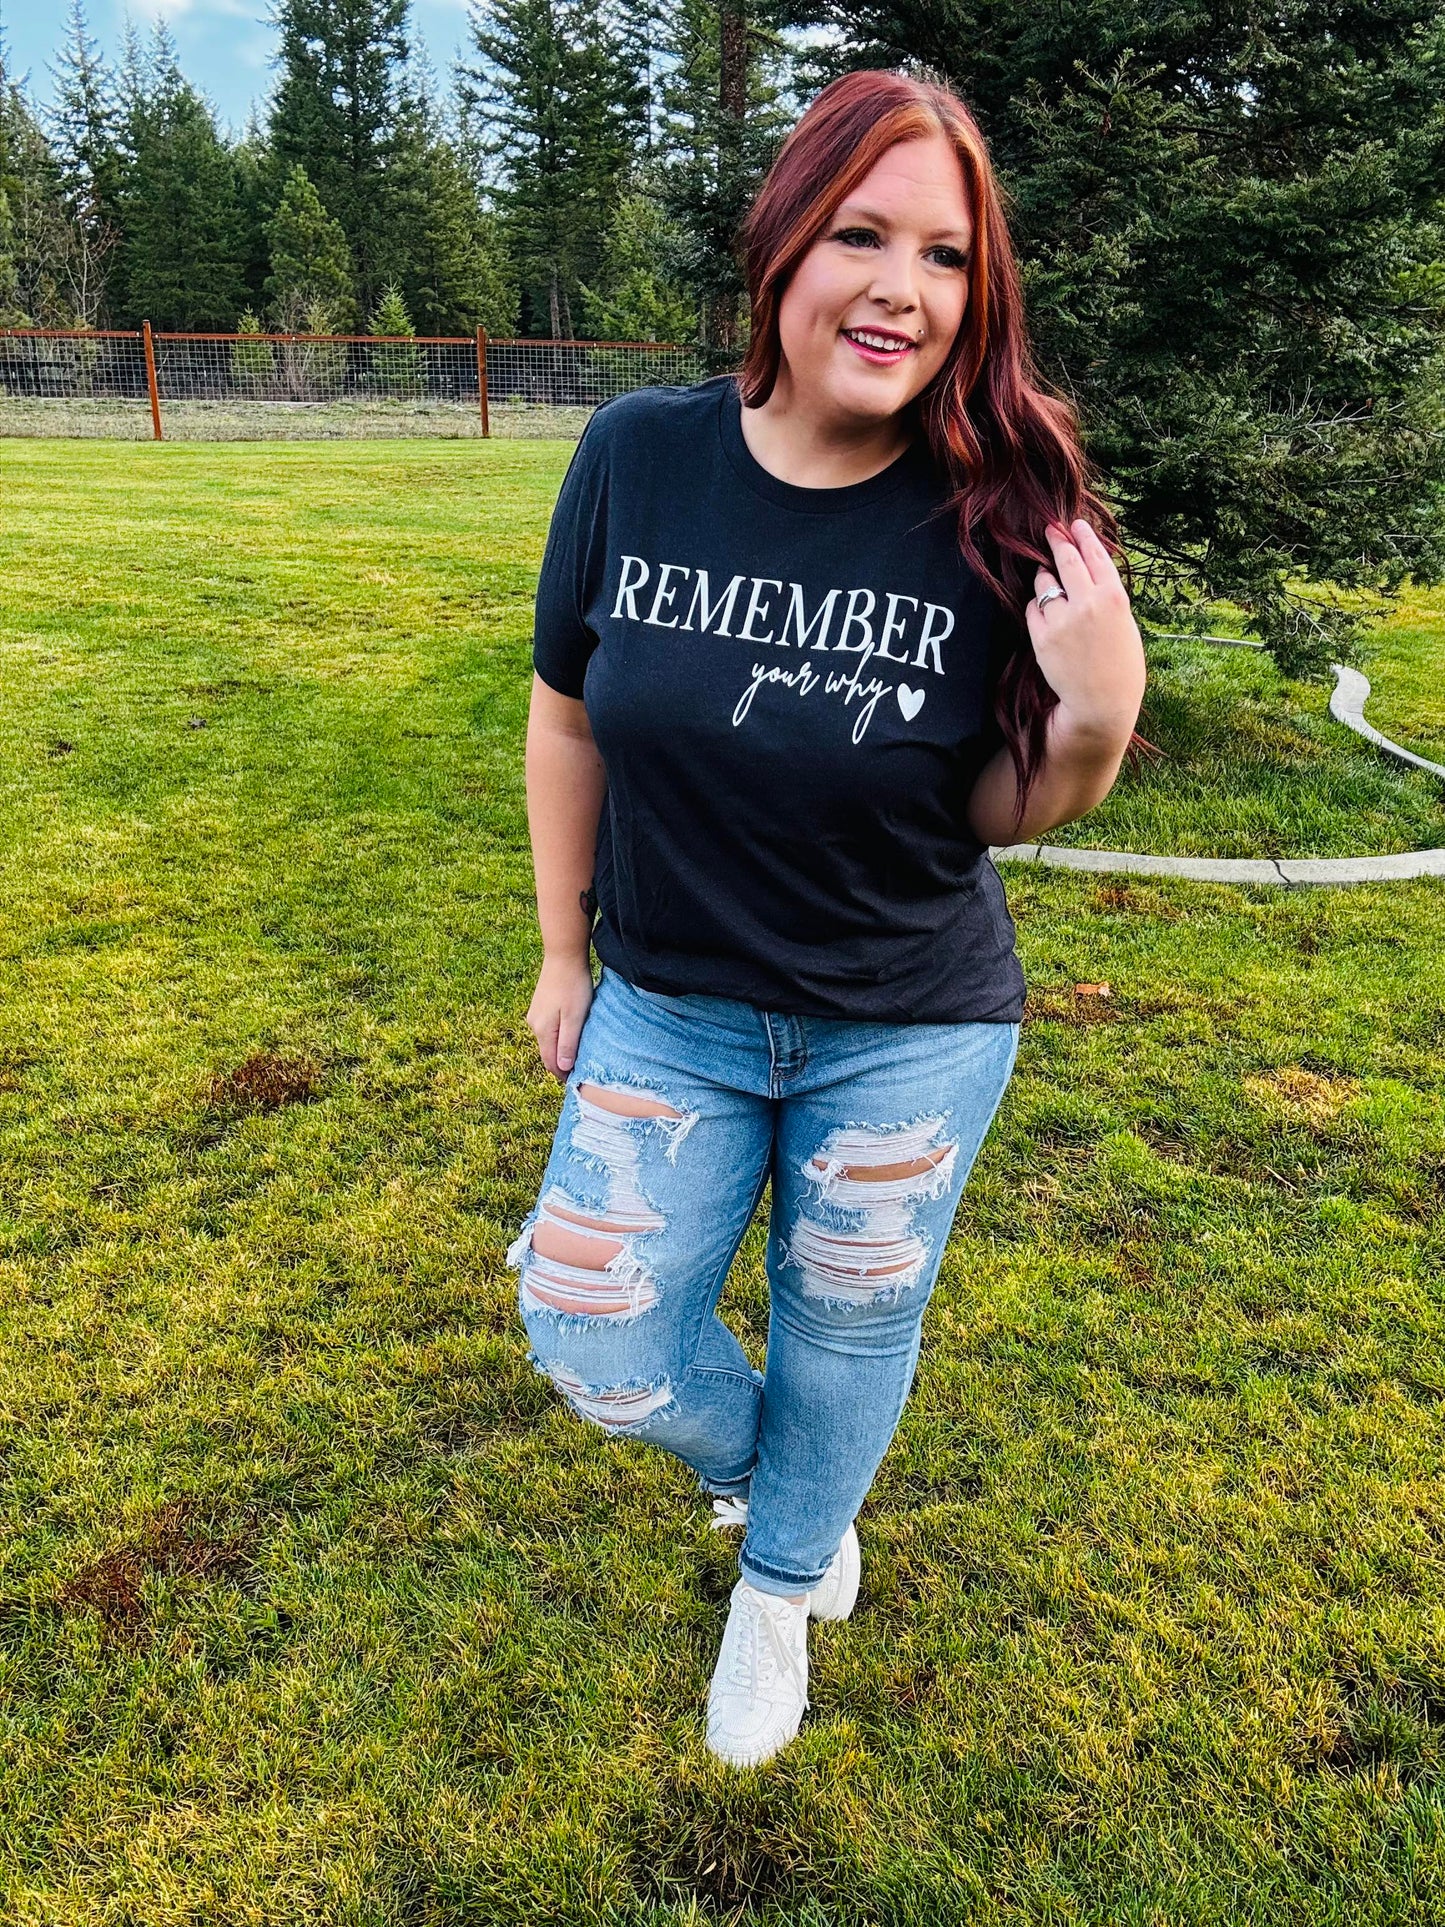 Remember Your Why Graphic Tee